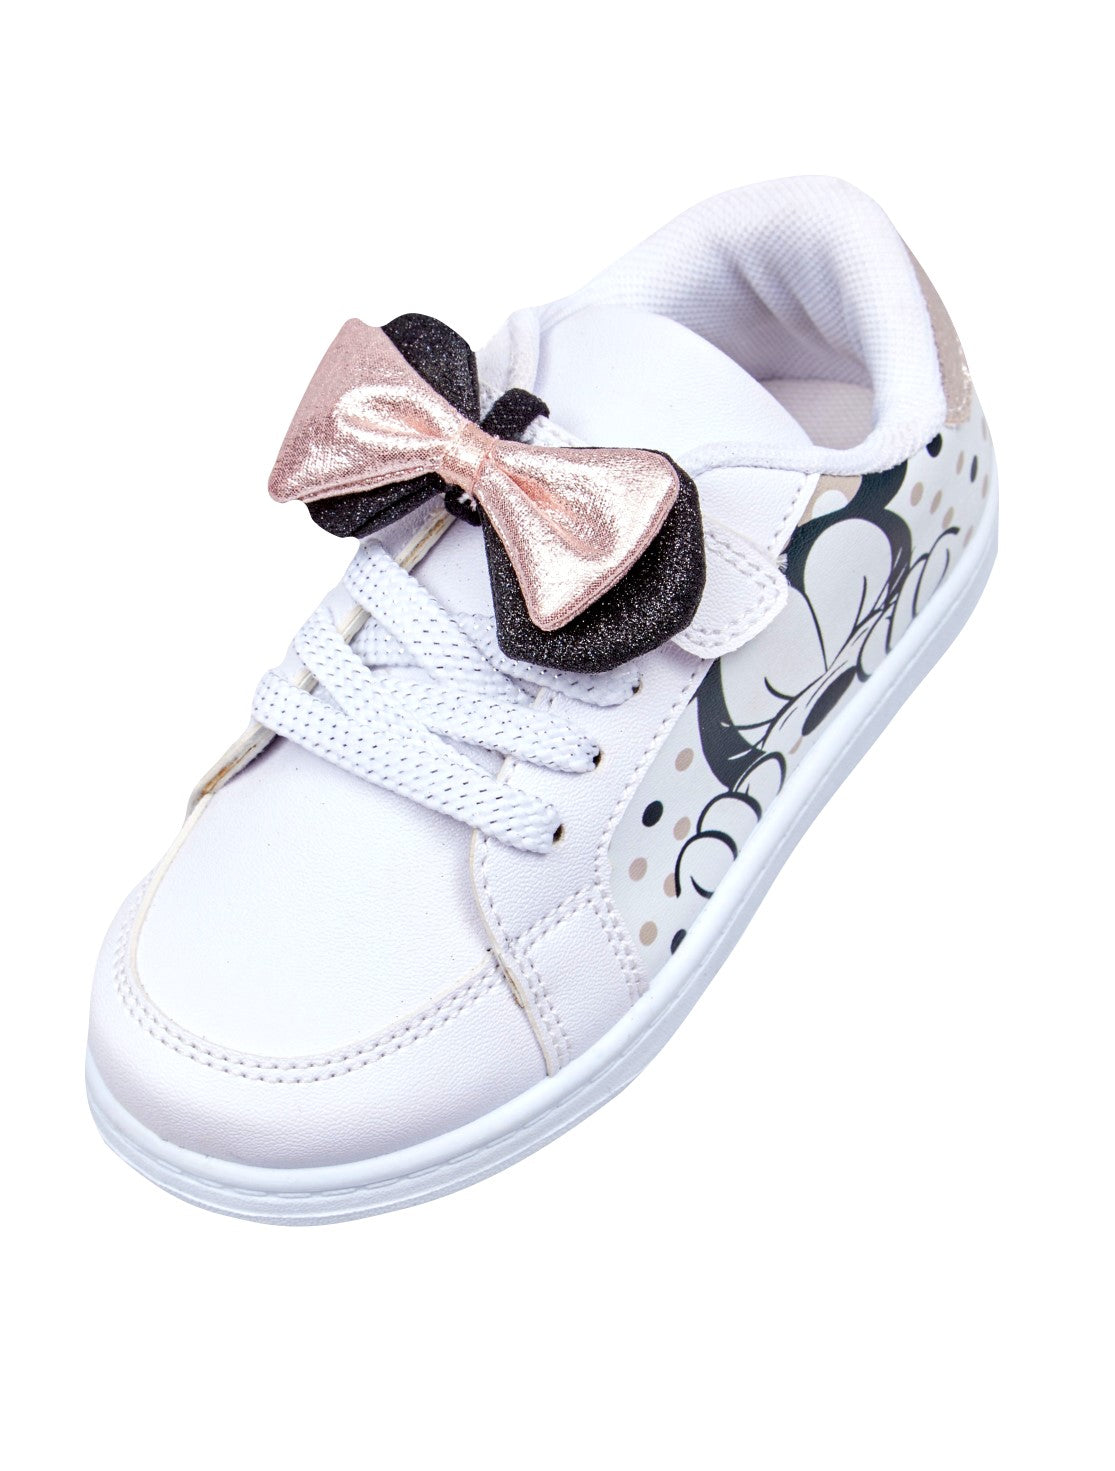 Officially Licensed Disney Minnie Mouse Girls' White Trainers